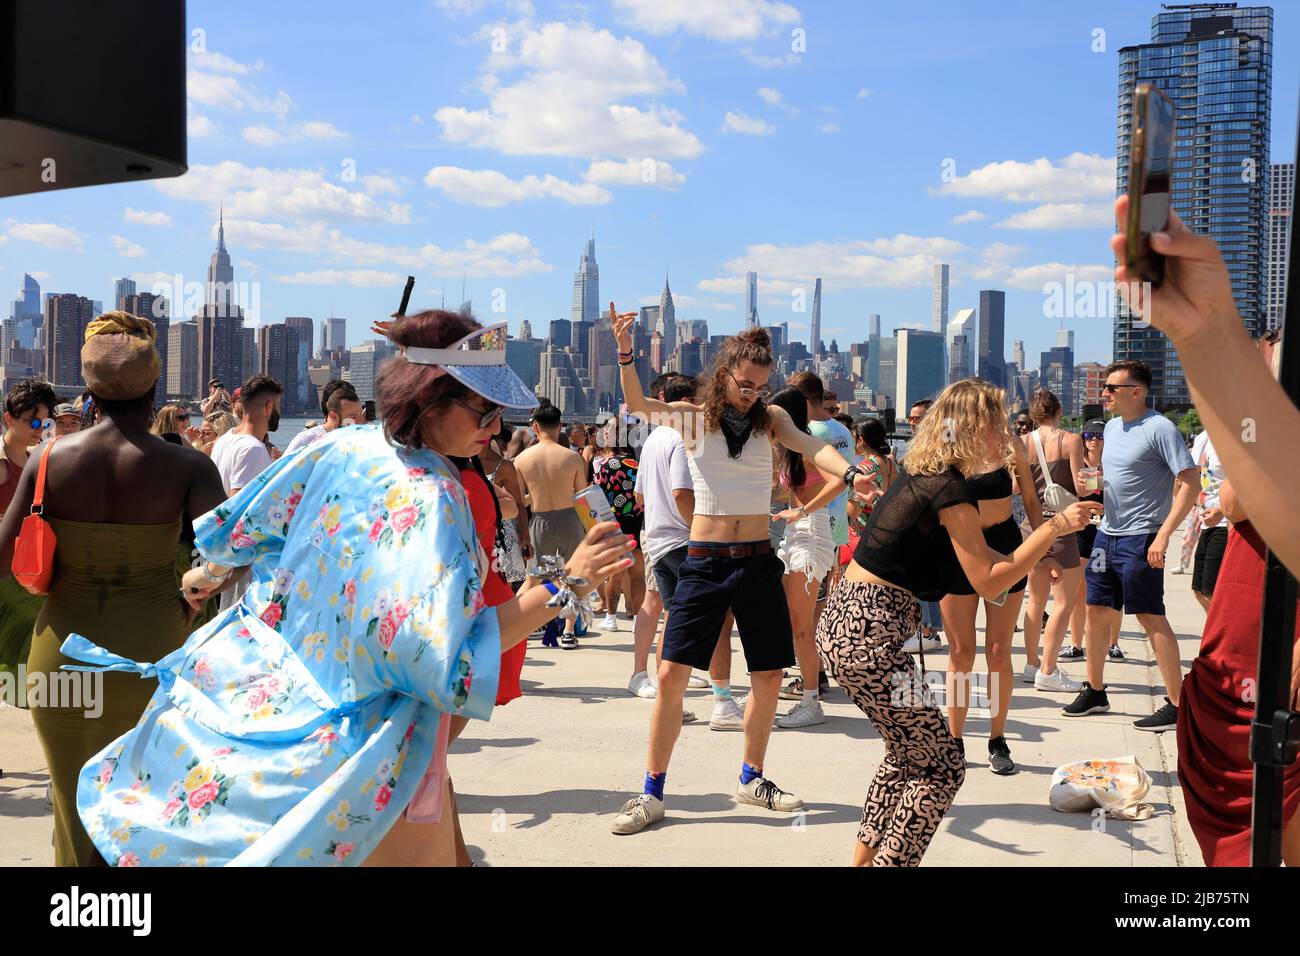 People dancing at the Hot Honey Sundays outdoor dance party in Greenpoint Terminal Market with East River and Manhattan skyline in the background.Greenpoint.Brooklyn.New York City.USA Stock Photo